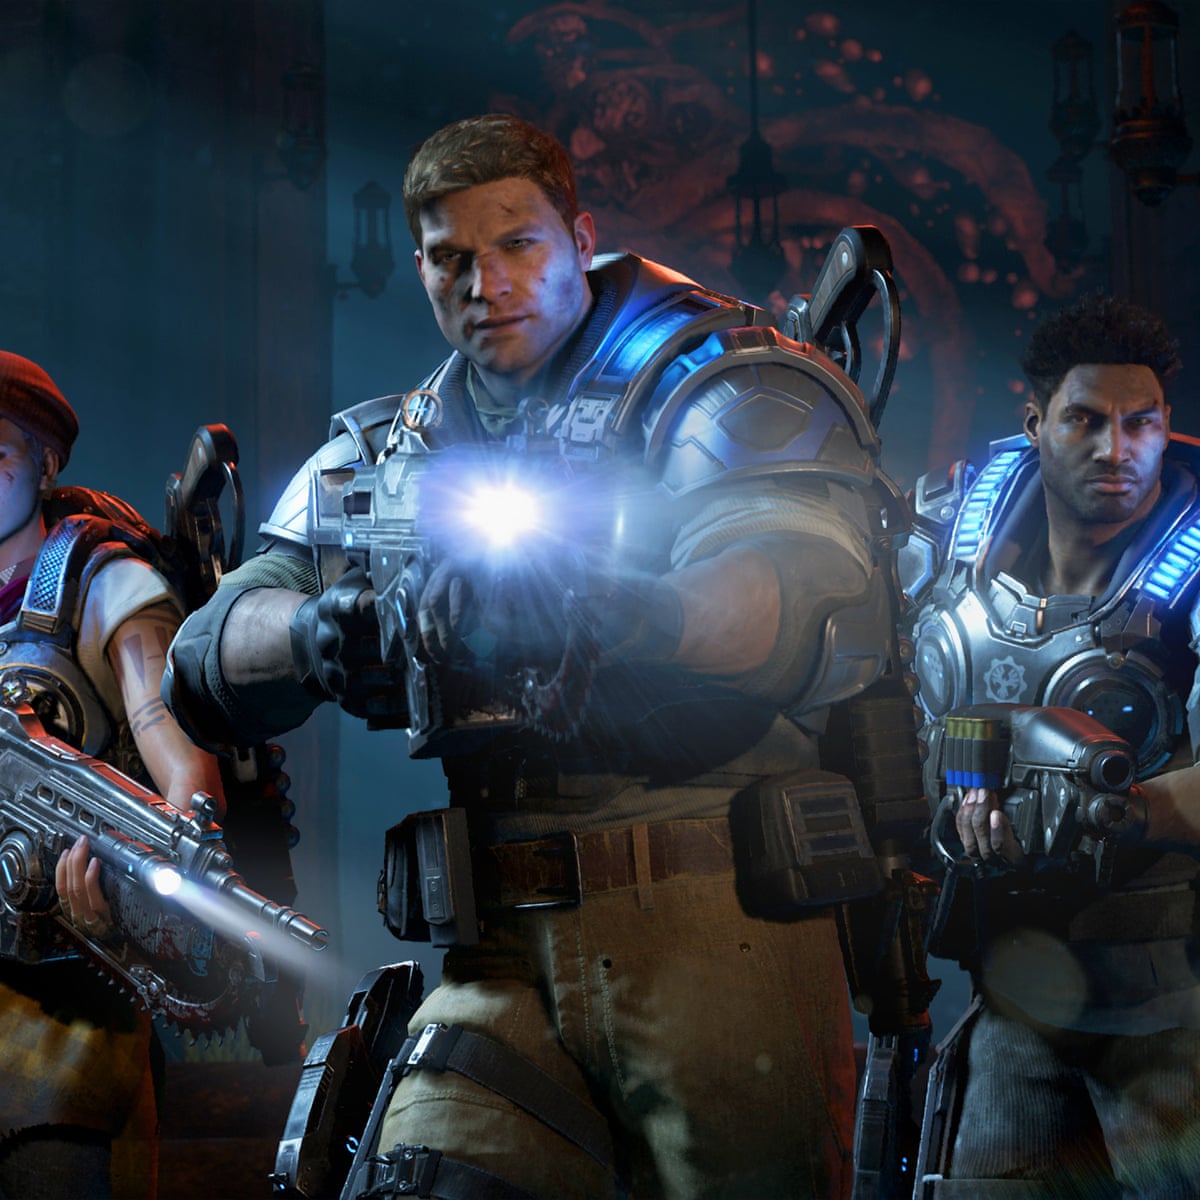 Gears of War 4 review – a shot in the arm for a fading series